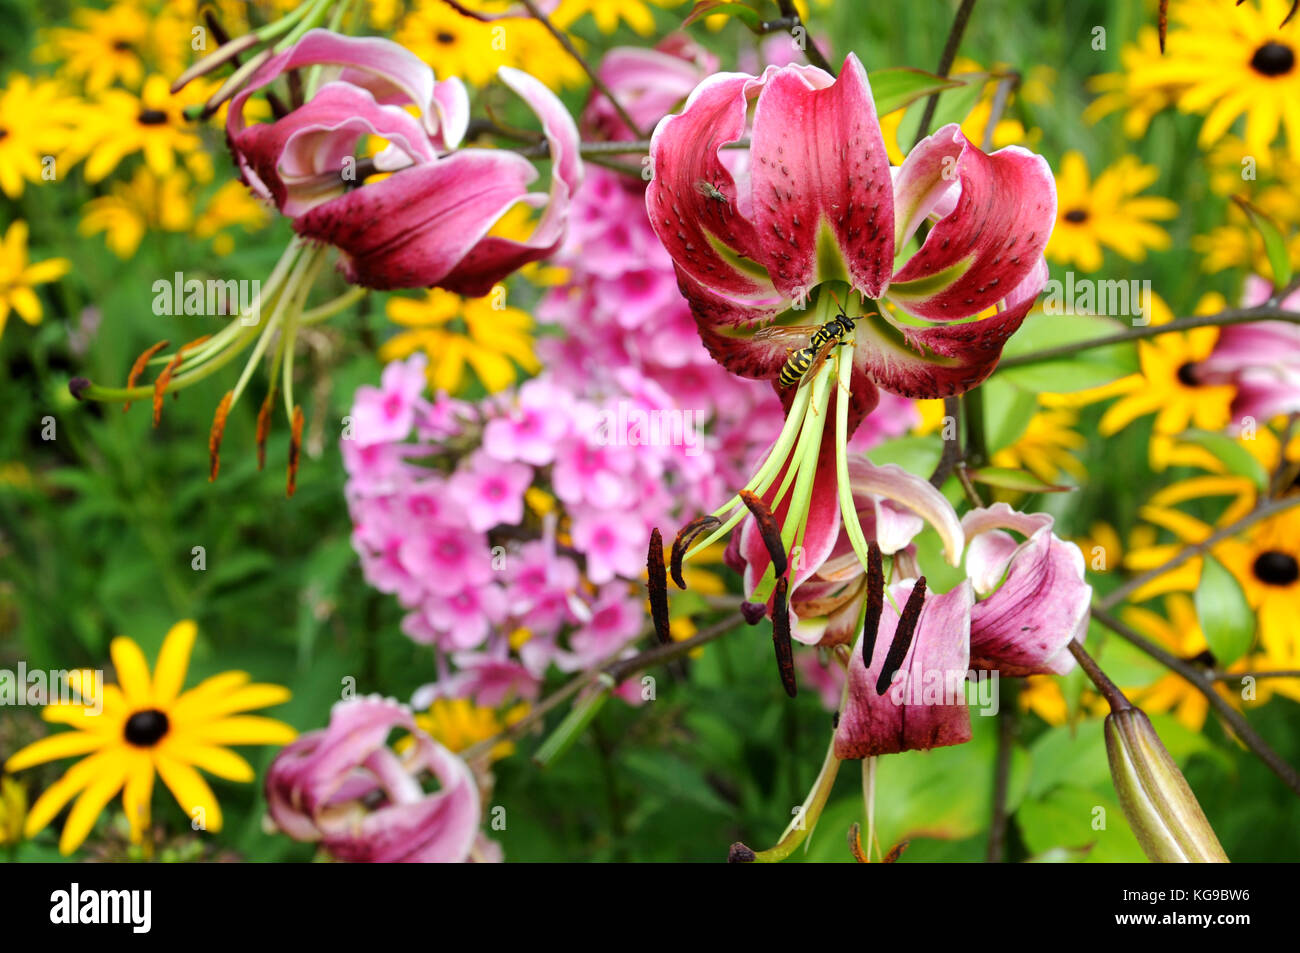 flowerbed with lilies, phlox and black-eyed susans Stock Photo